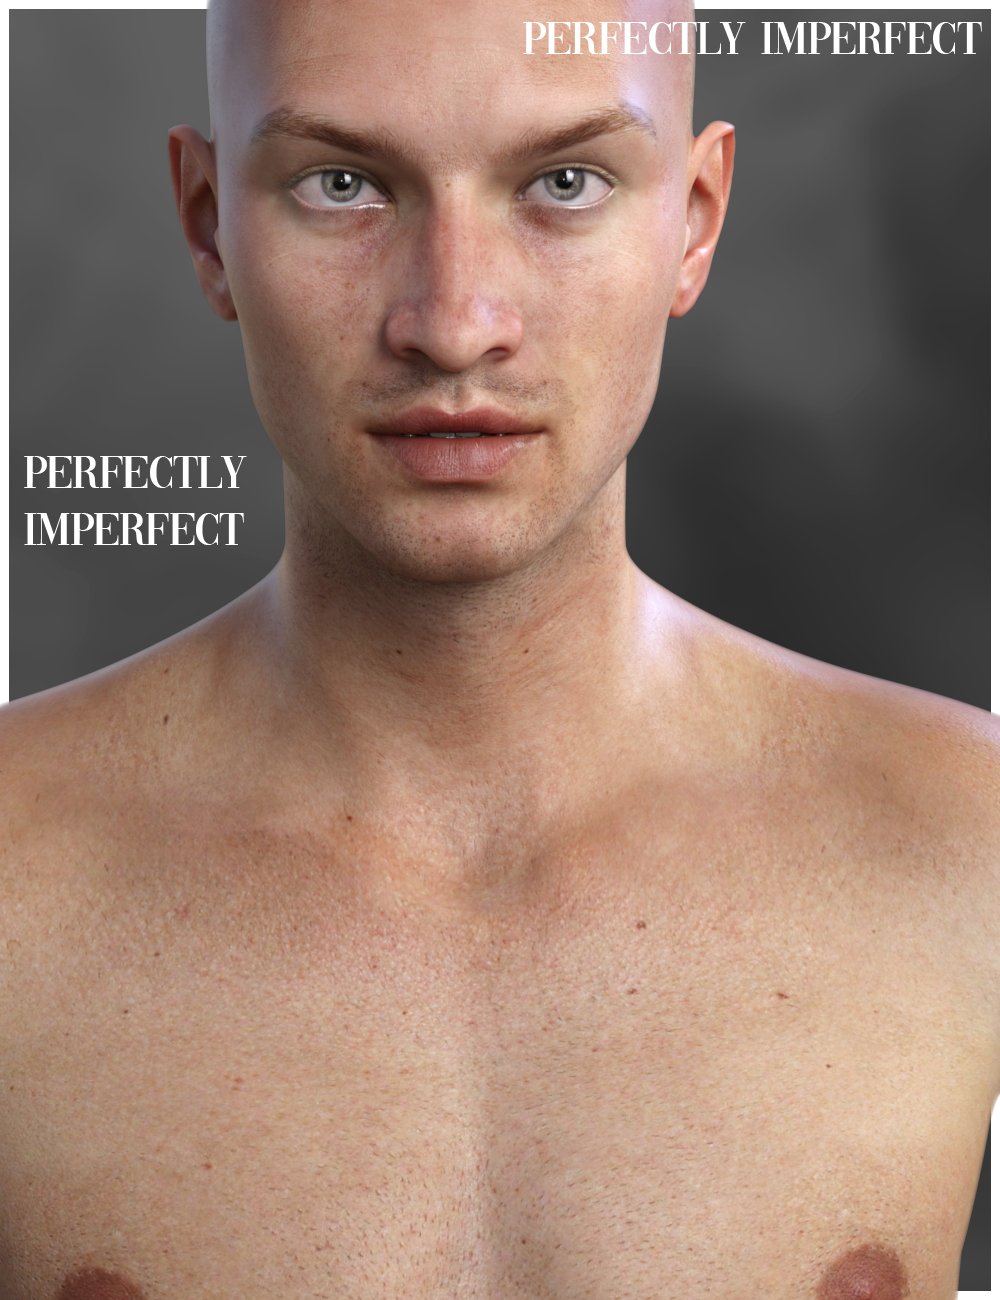 RY Perfectly Imperfect and Skin Merchant Resource for Genesis 8.1 Male by: Raiya, 3D Models by Daz 3D